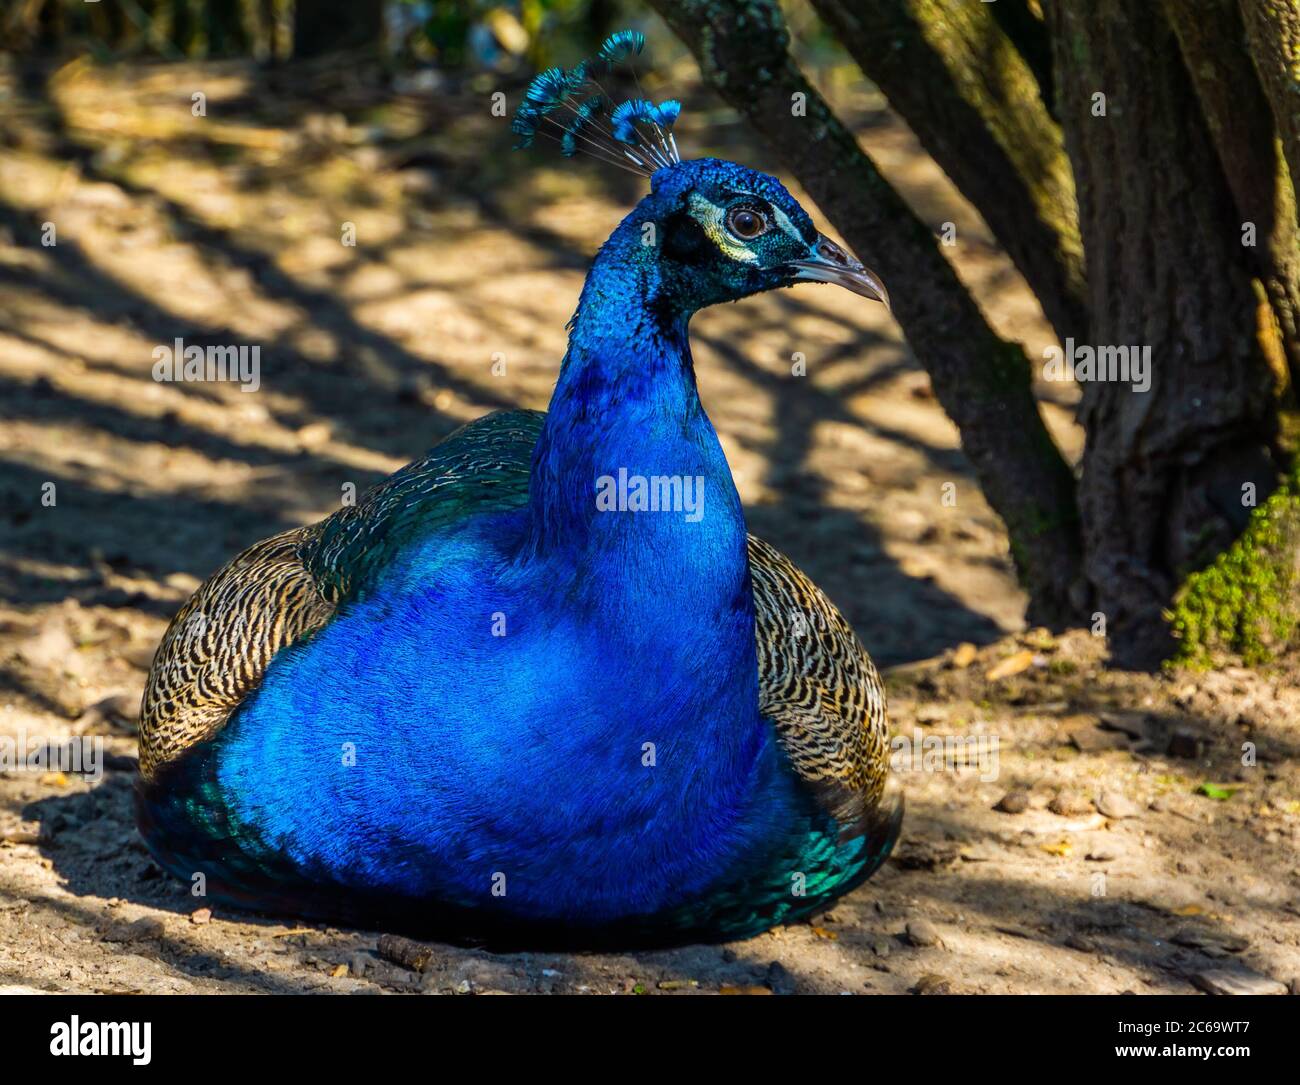 closeup portrait of a beautiful indian peacock sitting on the ground, popular bird specie in aviculture Stock Photo